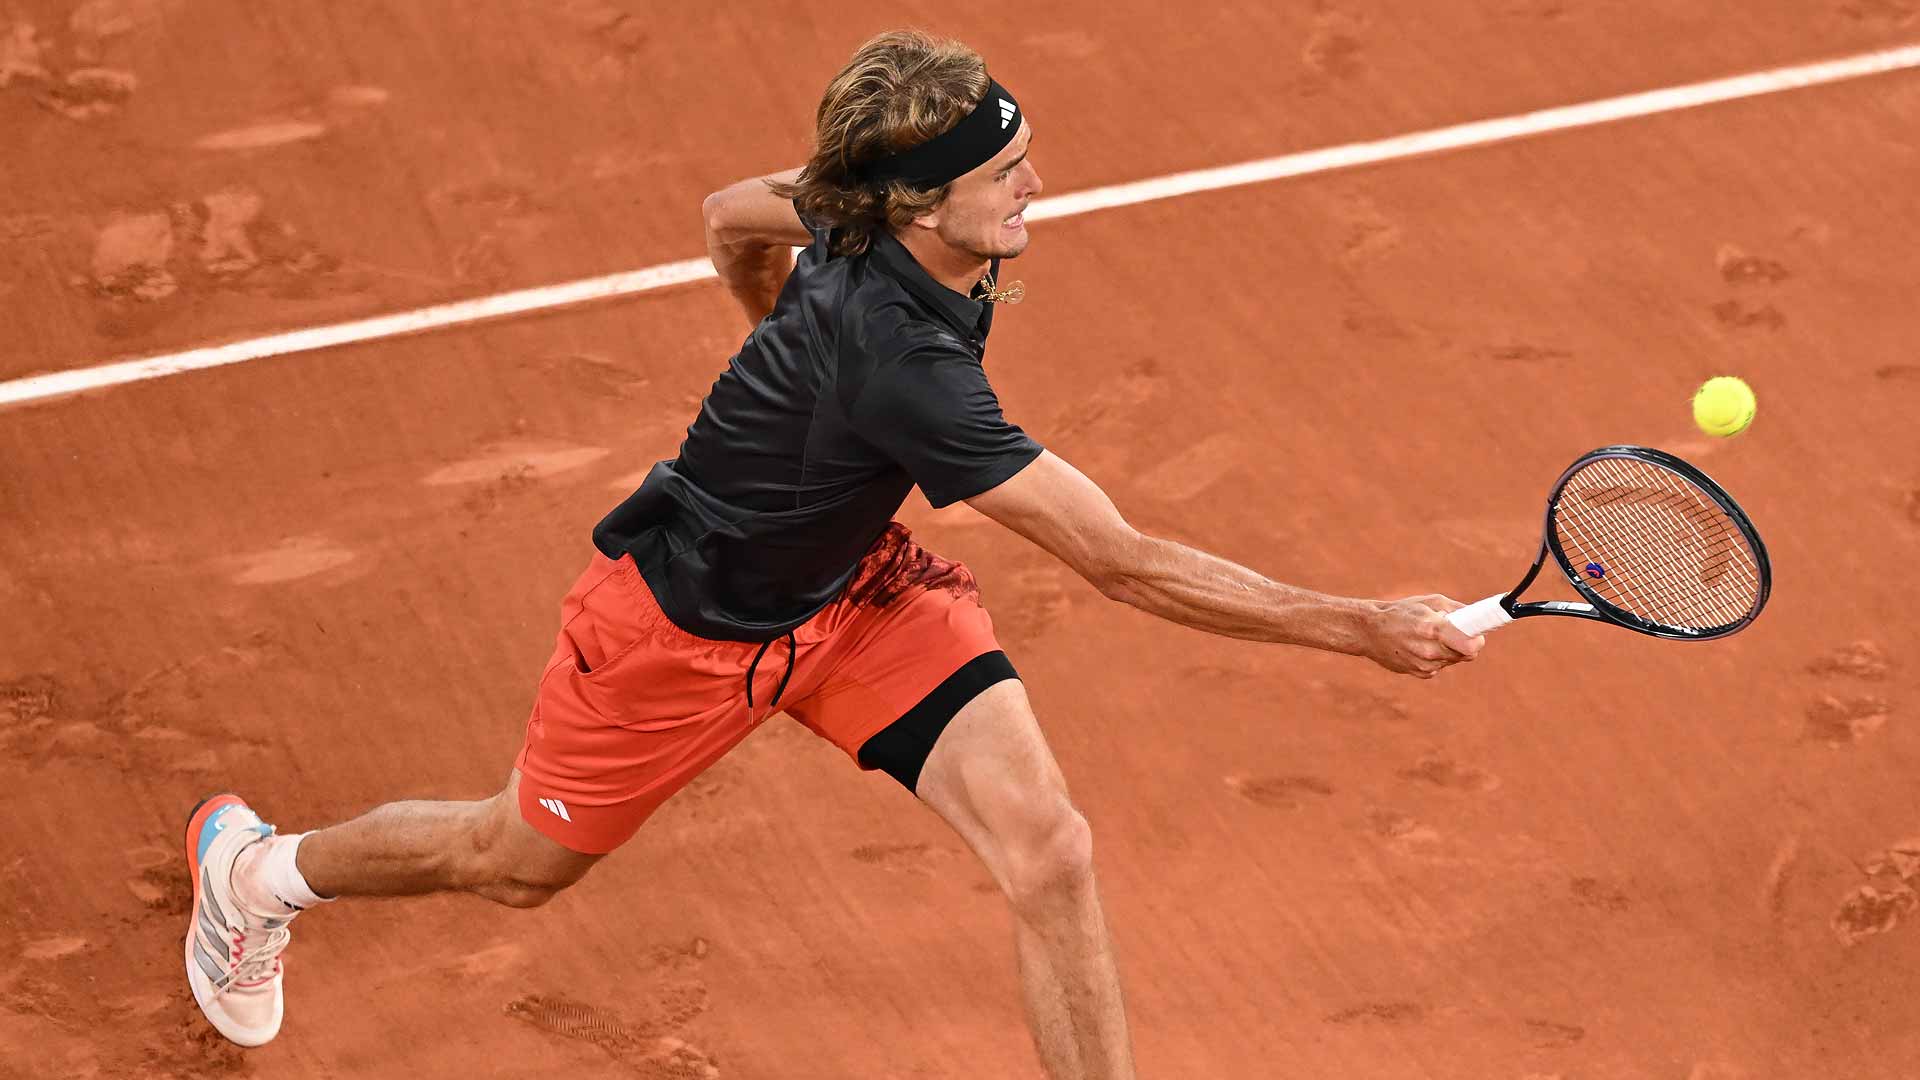 Alexander Zverev has dropped just one set en route to the fourth round at Roland Garros.